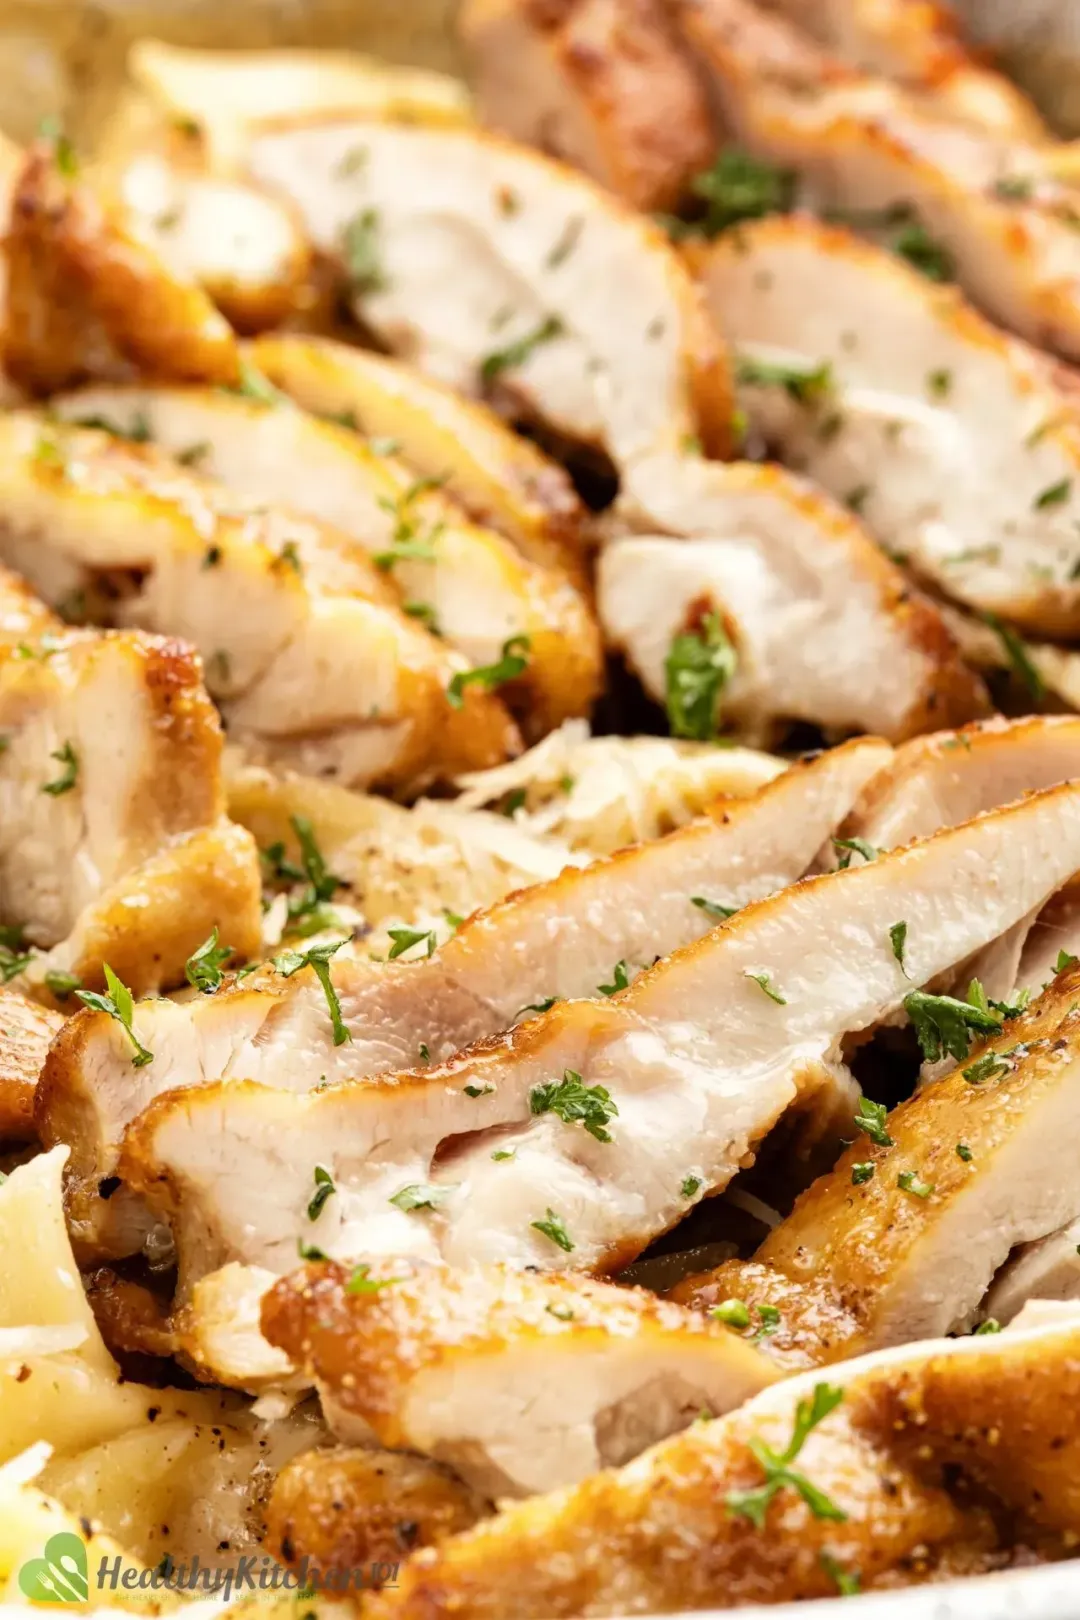 A close up of chicken slices with brown exterior and white meat